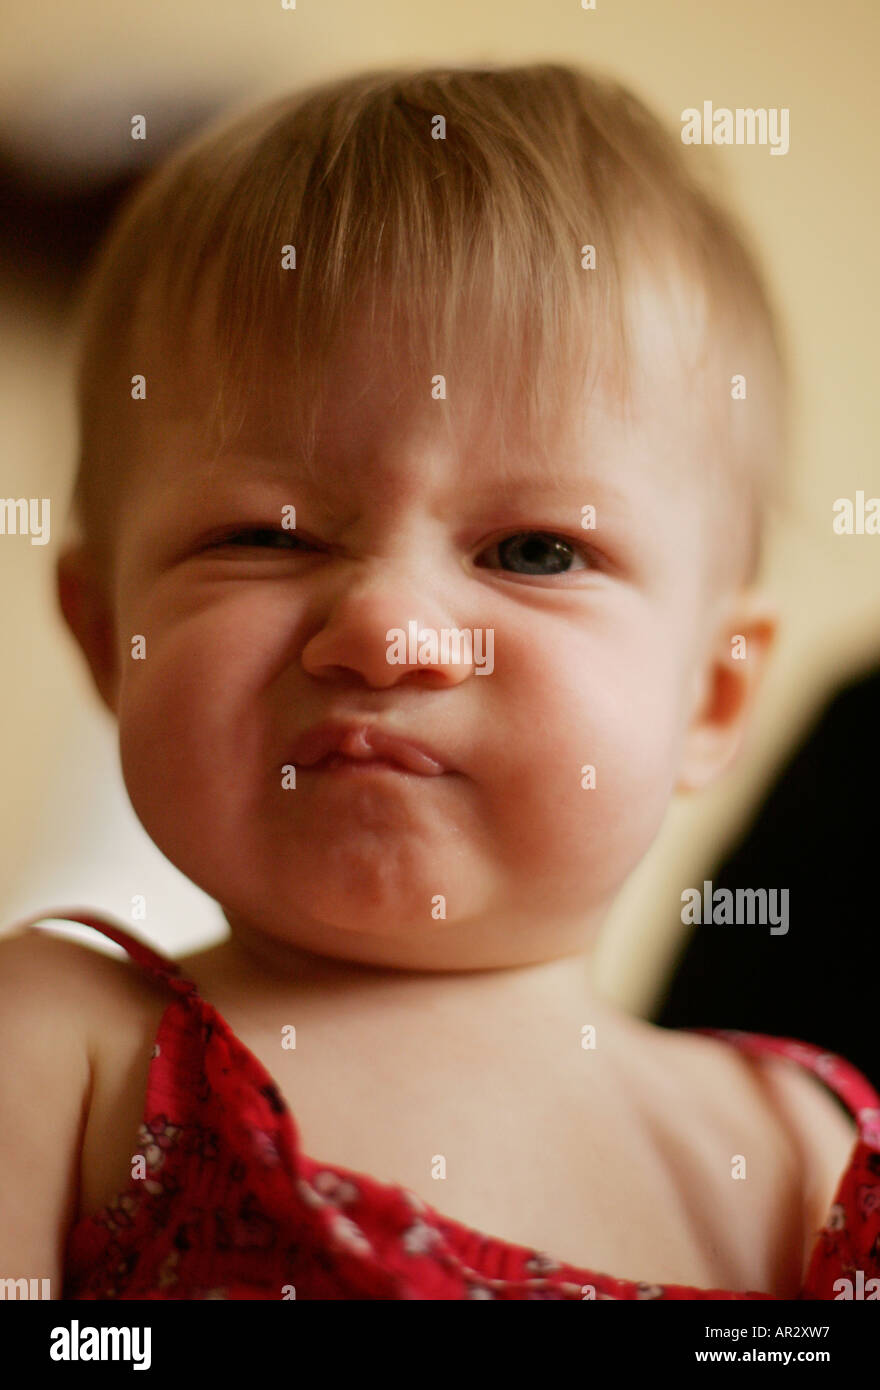 A toddler screws up her face in disgust at the camera. Stock Photo